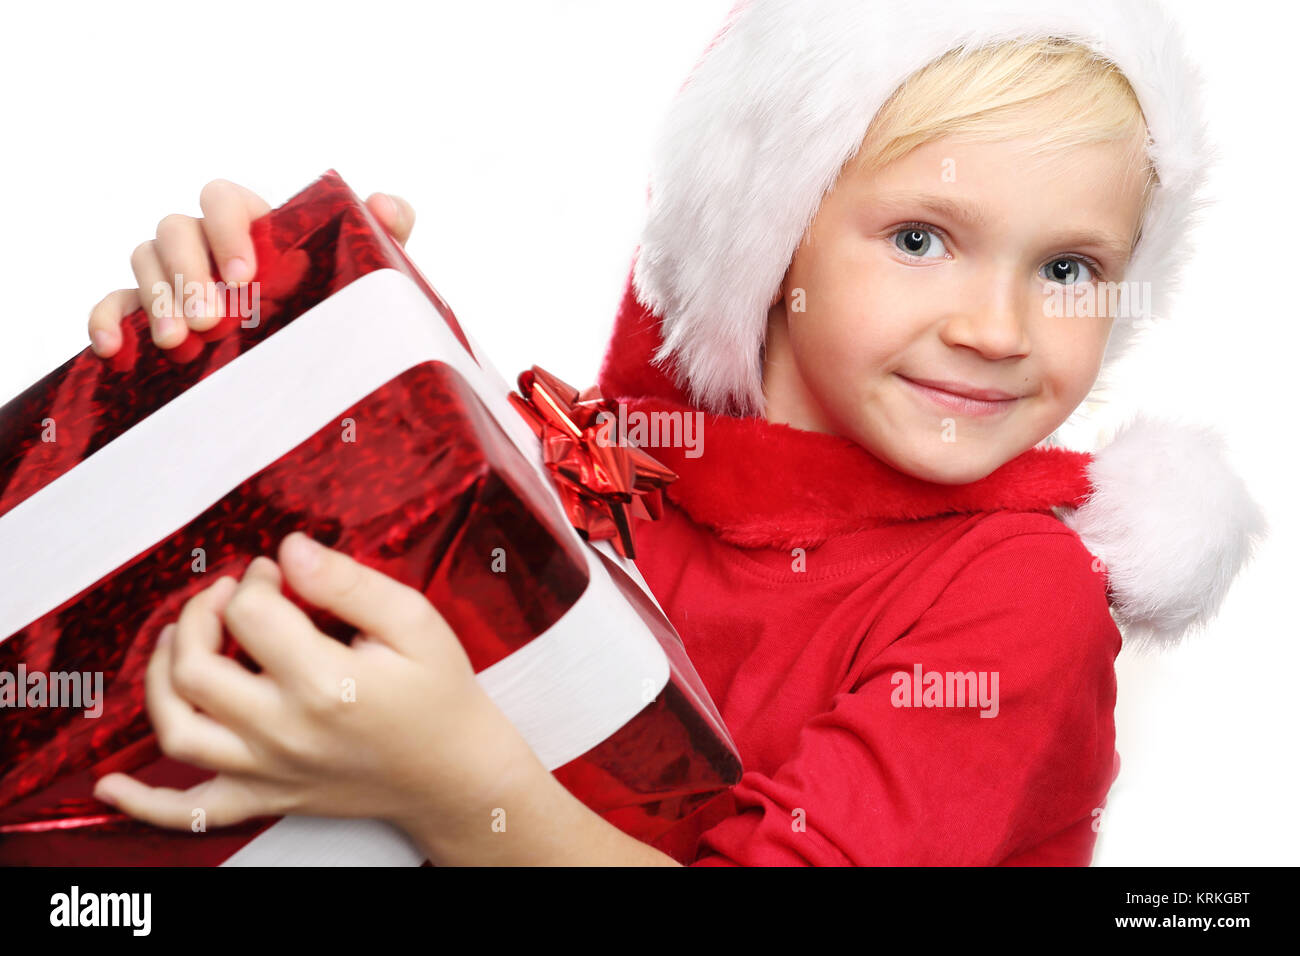 we make dreams come true. happy child with christmas present. Stock Photo